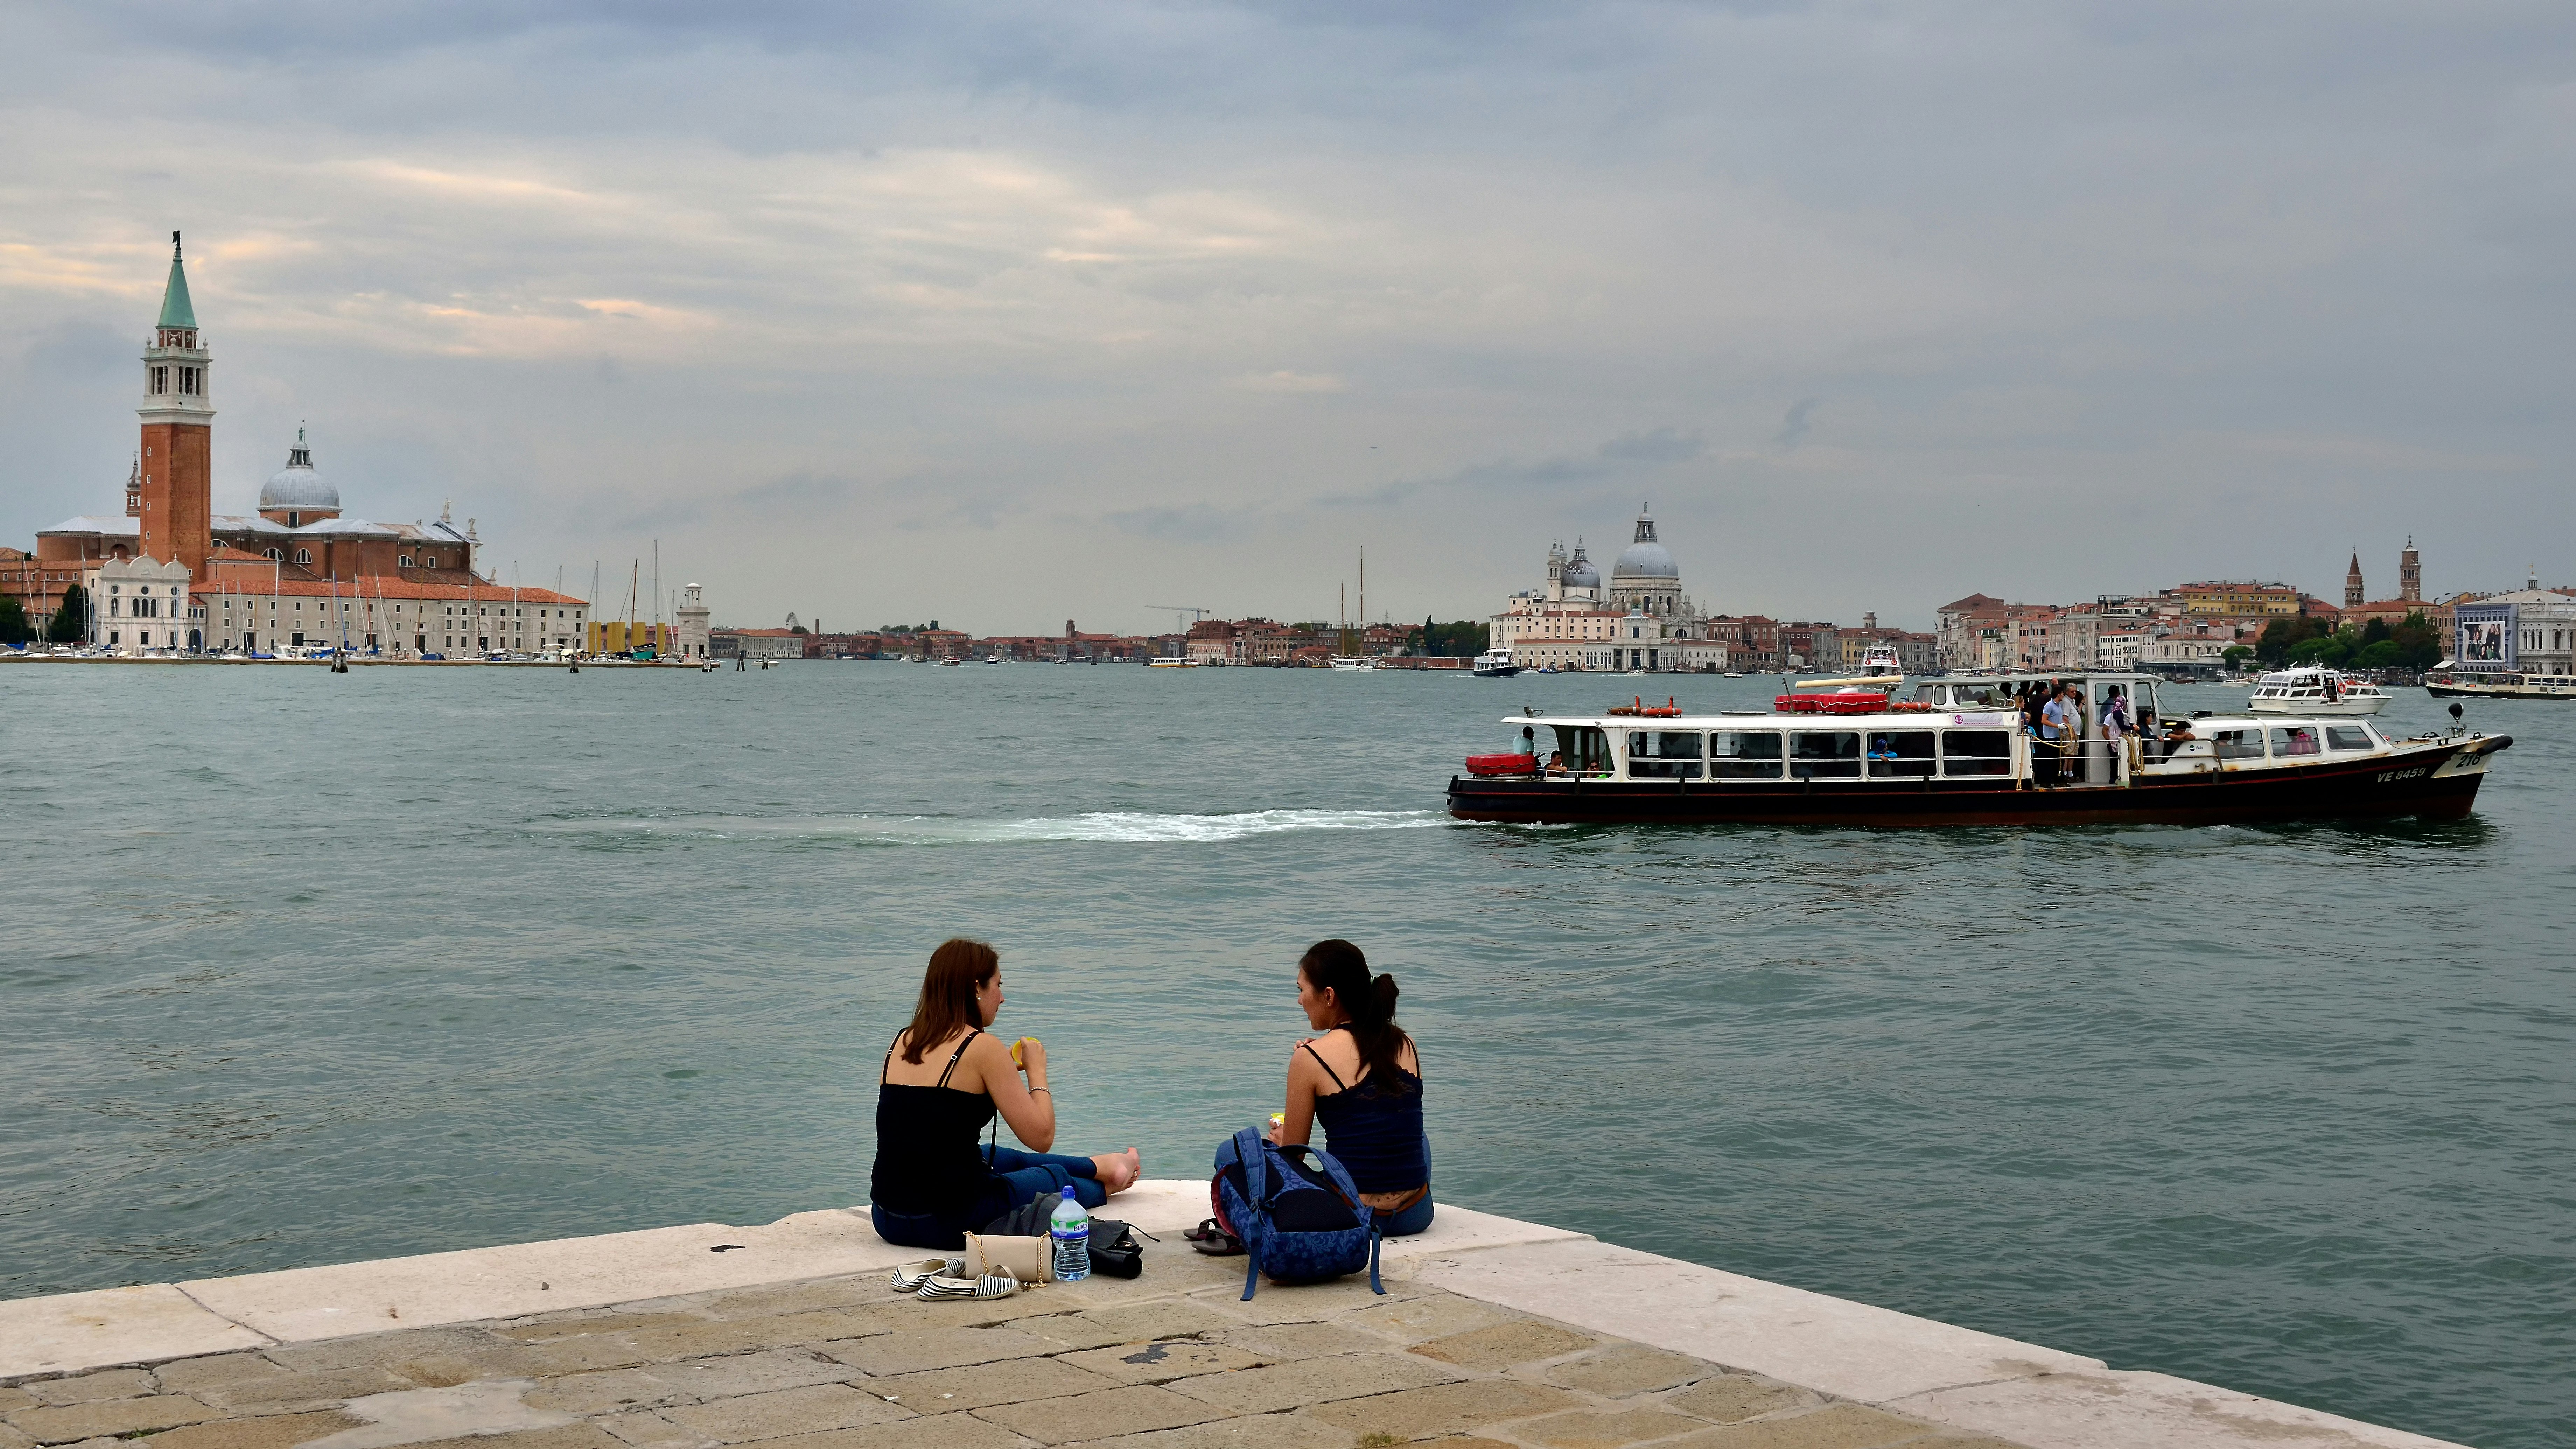 Two women have lunch next to a canal in Venice